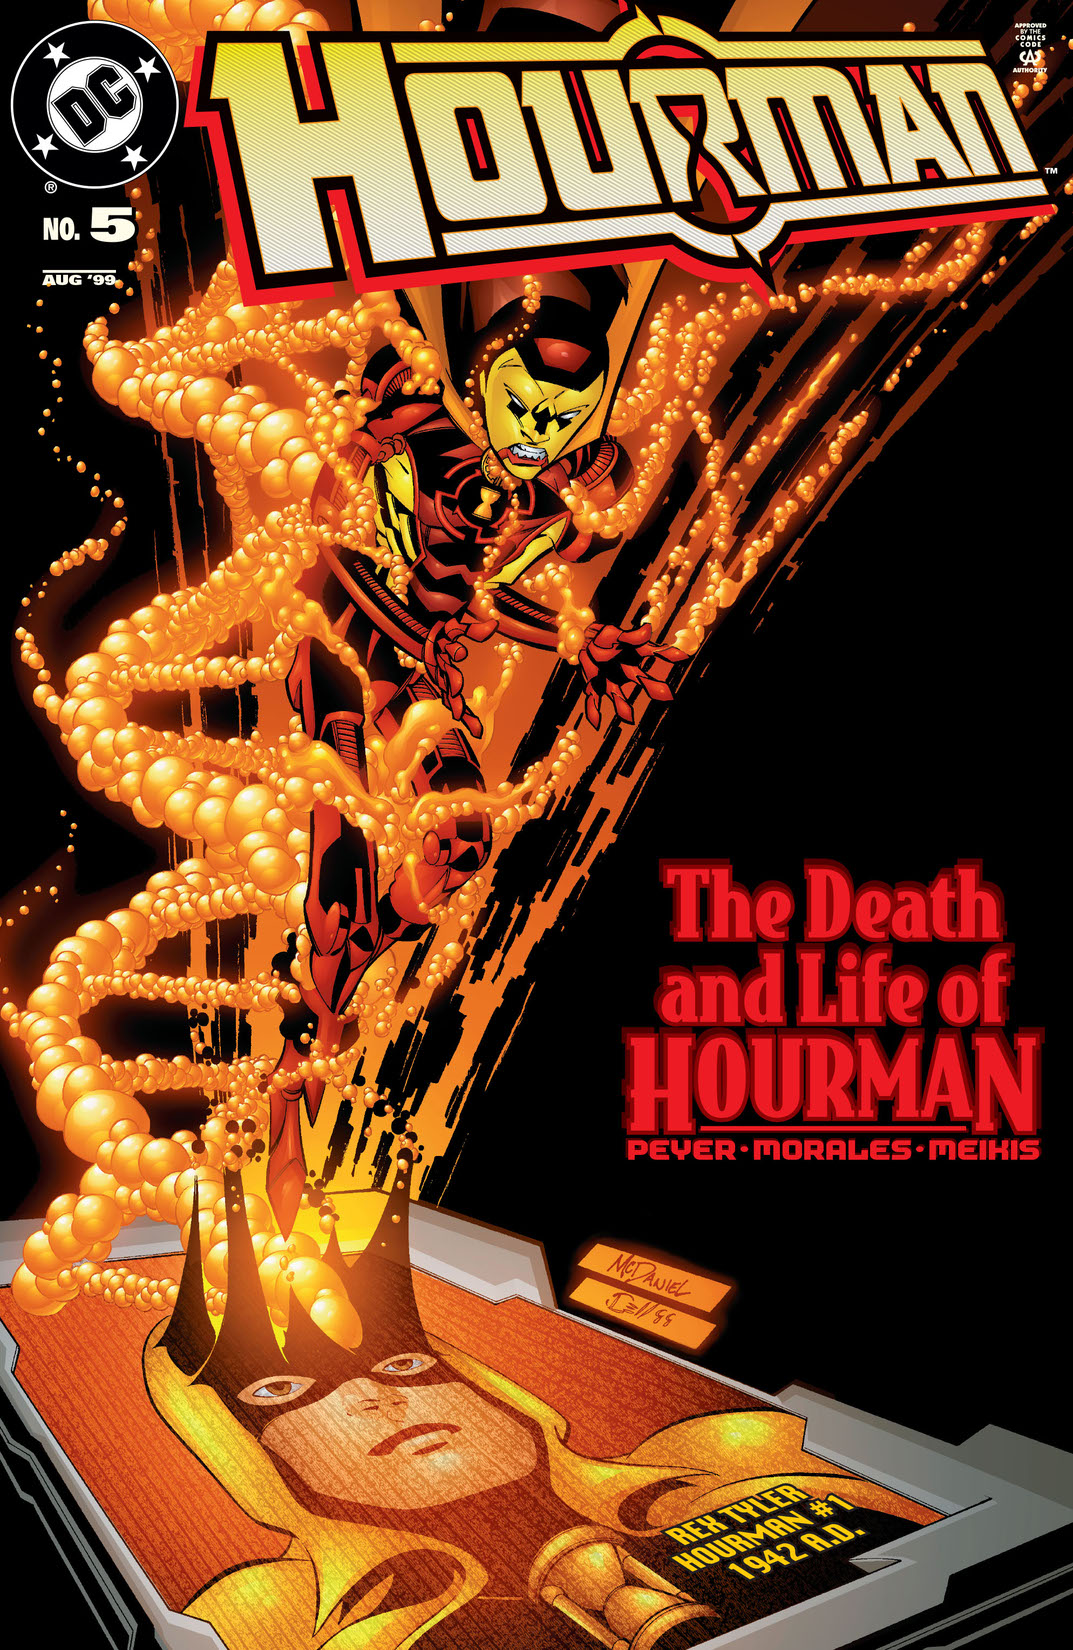 Hourman #5 preview images